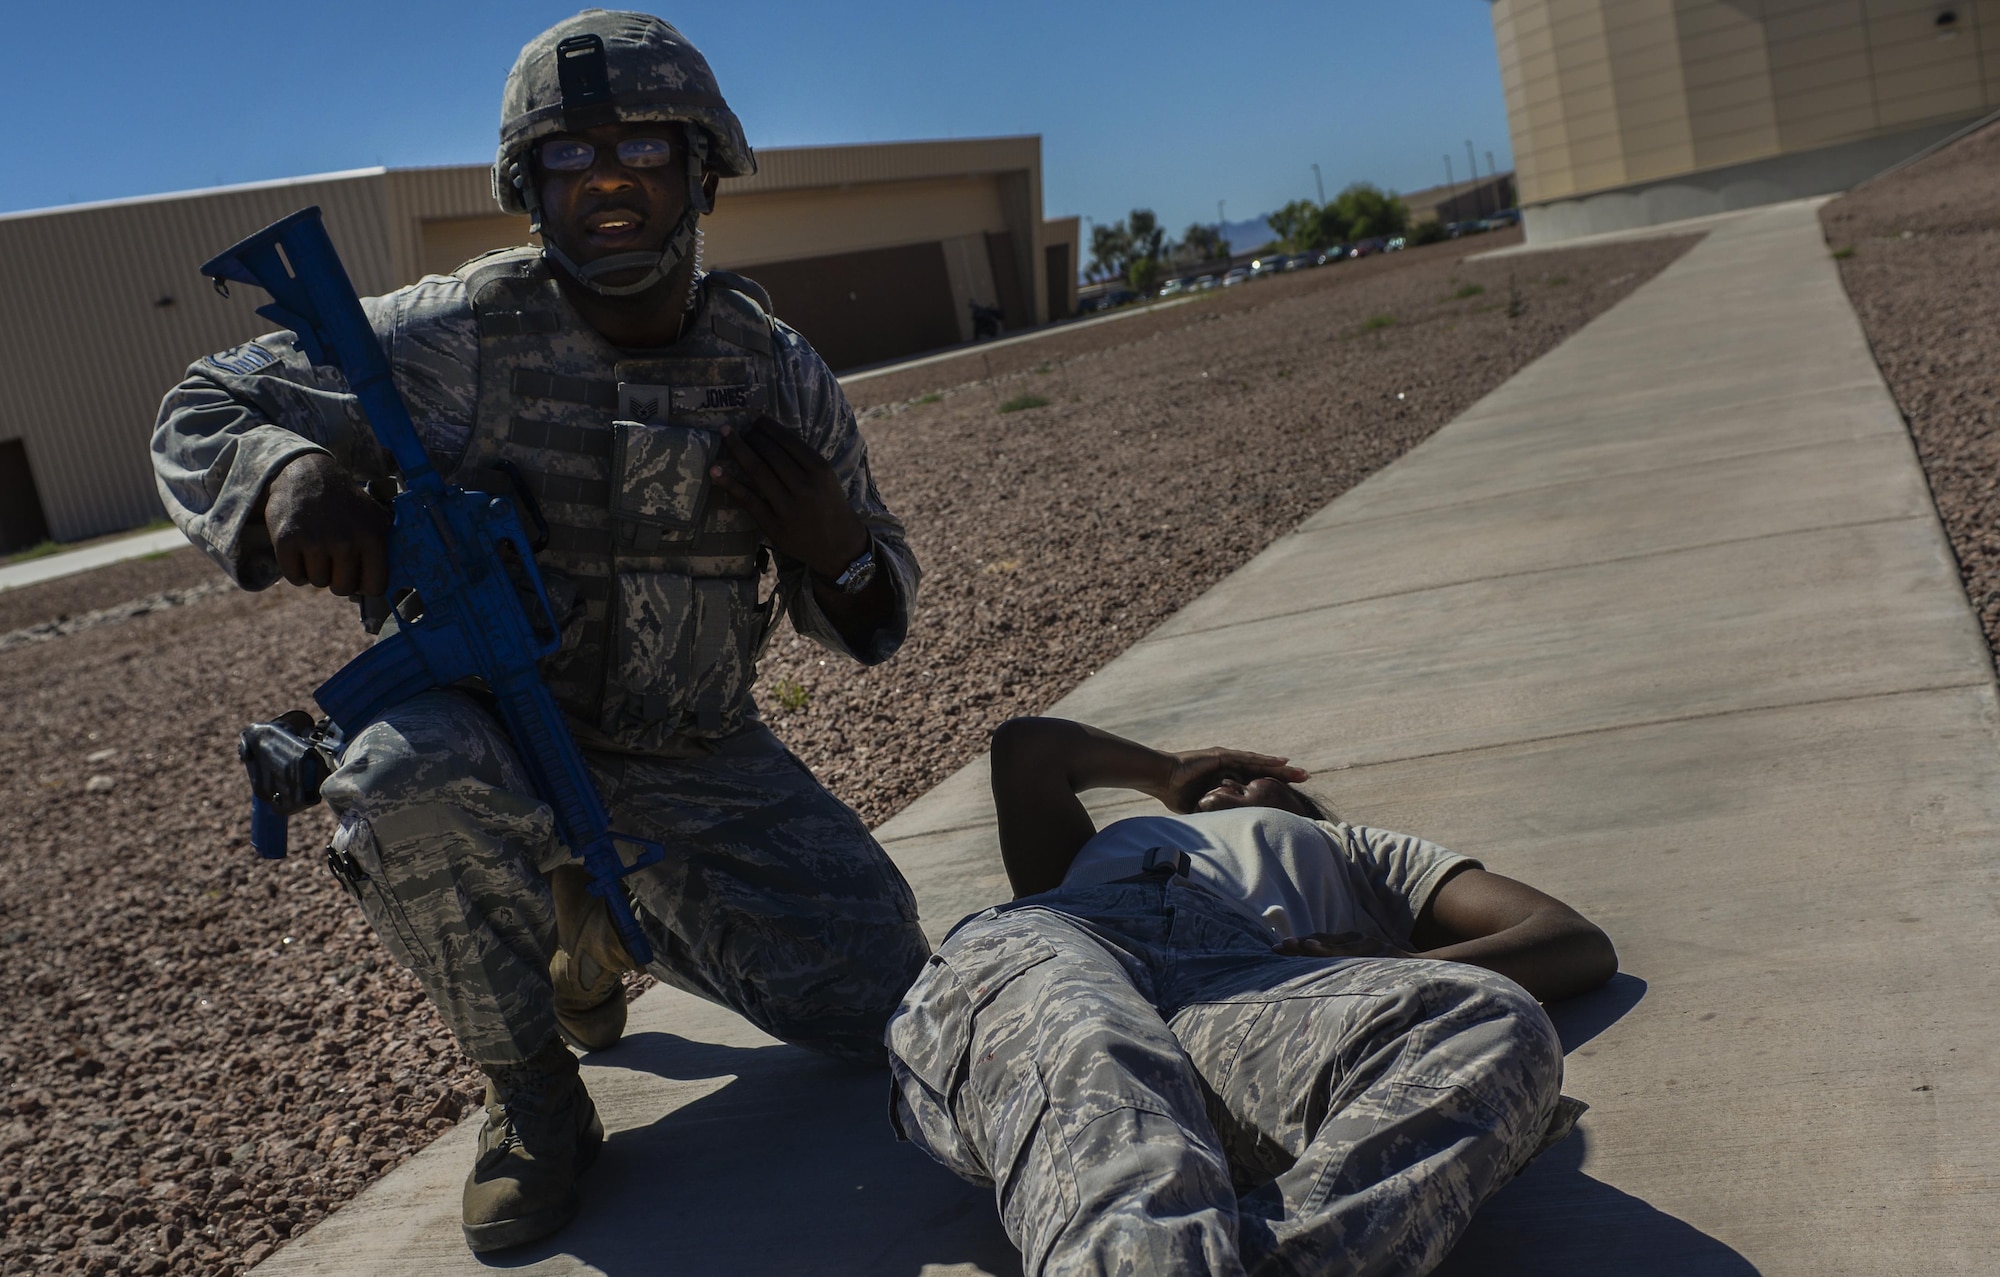 A 99th Security Forces Squadron Airman uses his radio to communicate with other Airmen on the scene during a simulated active shooter attack during a base exercise at Nellis Air Force Base, Nev., May 12, 2016. The exercise scenario was complex and had many moving part in order to present unique challenges to the units that participated. (U.S. Air Force photo by Airman 1st Class Kevin Tanenbaum)